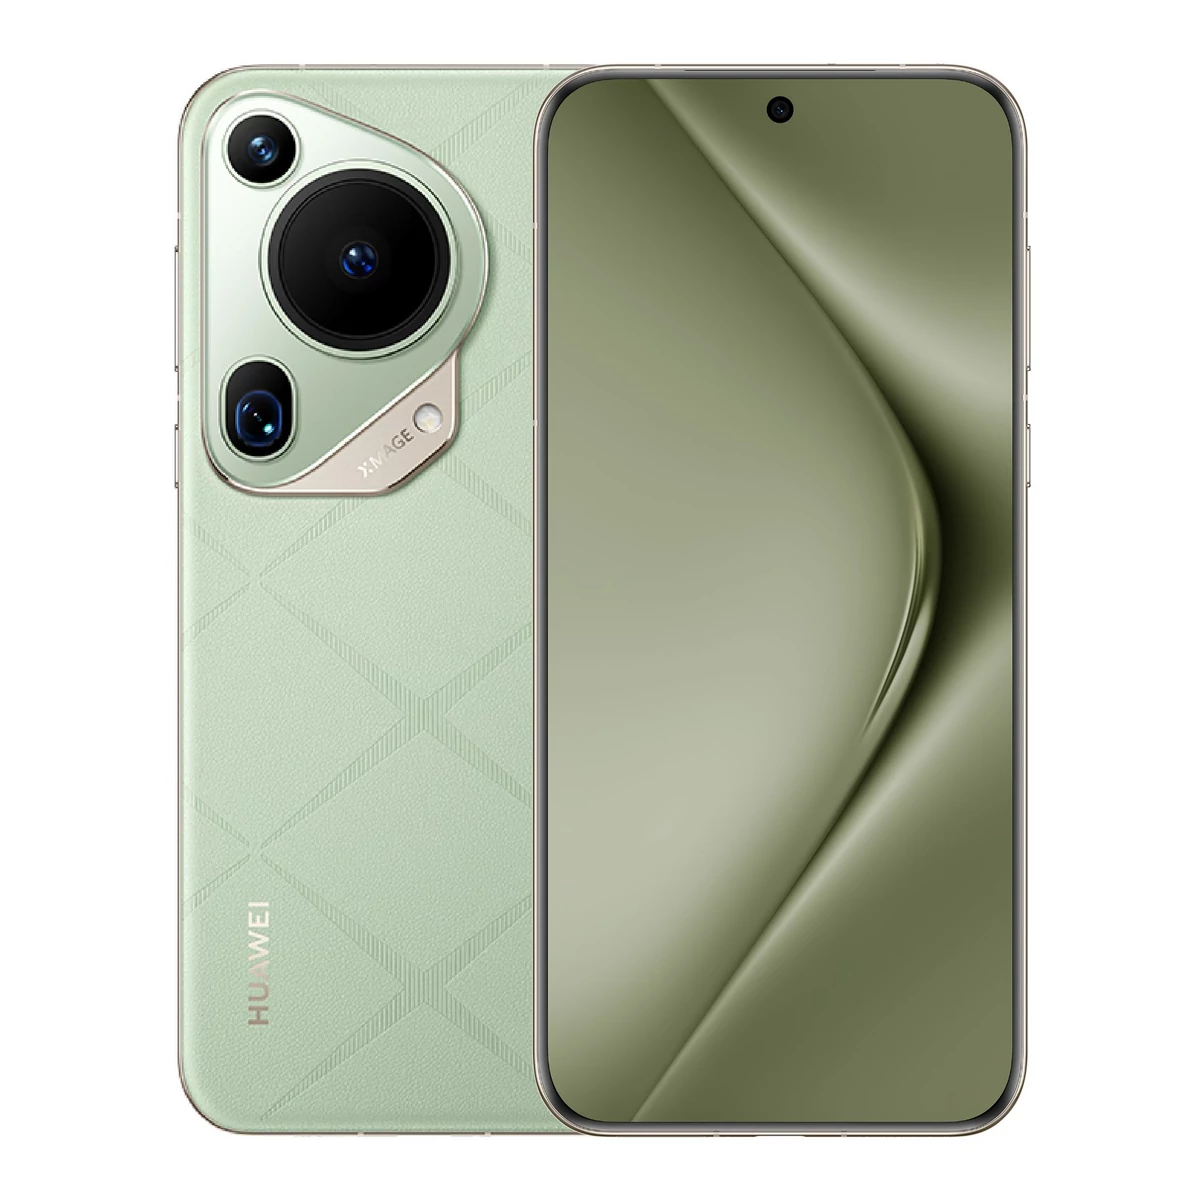 Huawei is rebranding its photo smartphone line and bringing it to Poland.  We know the prices